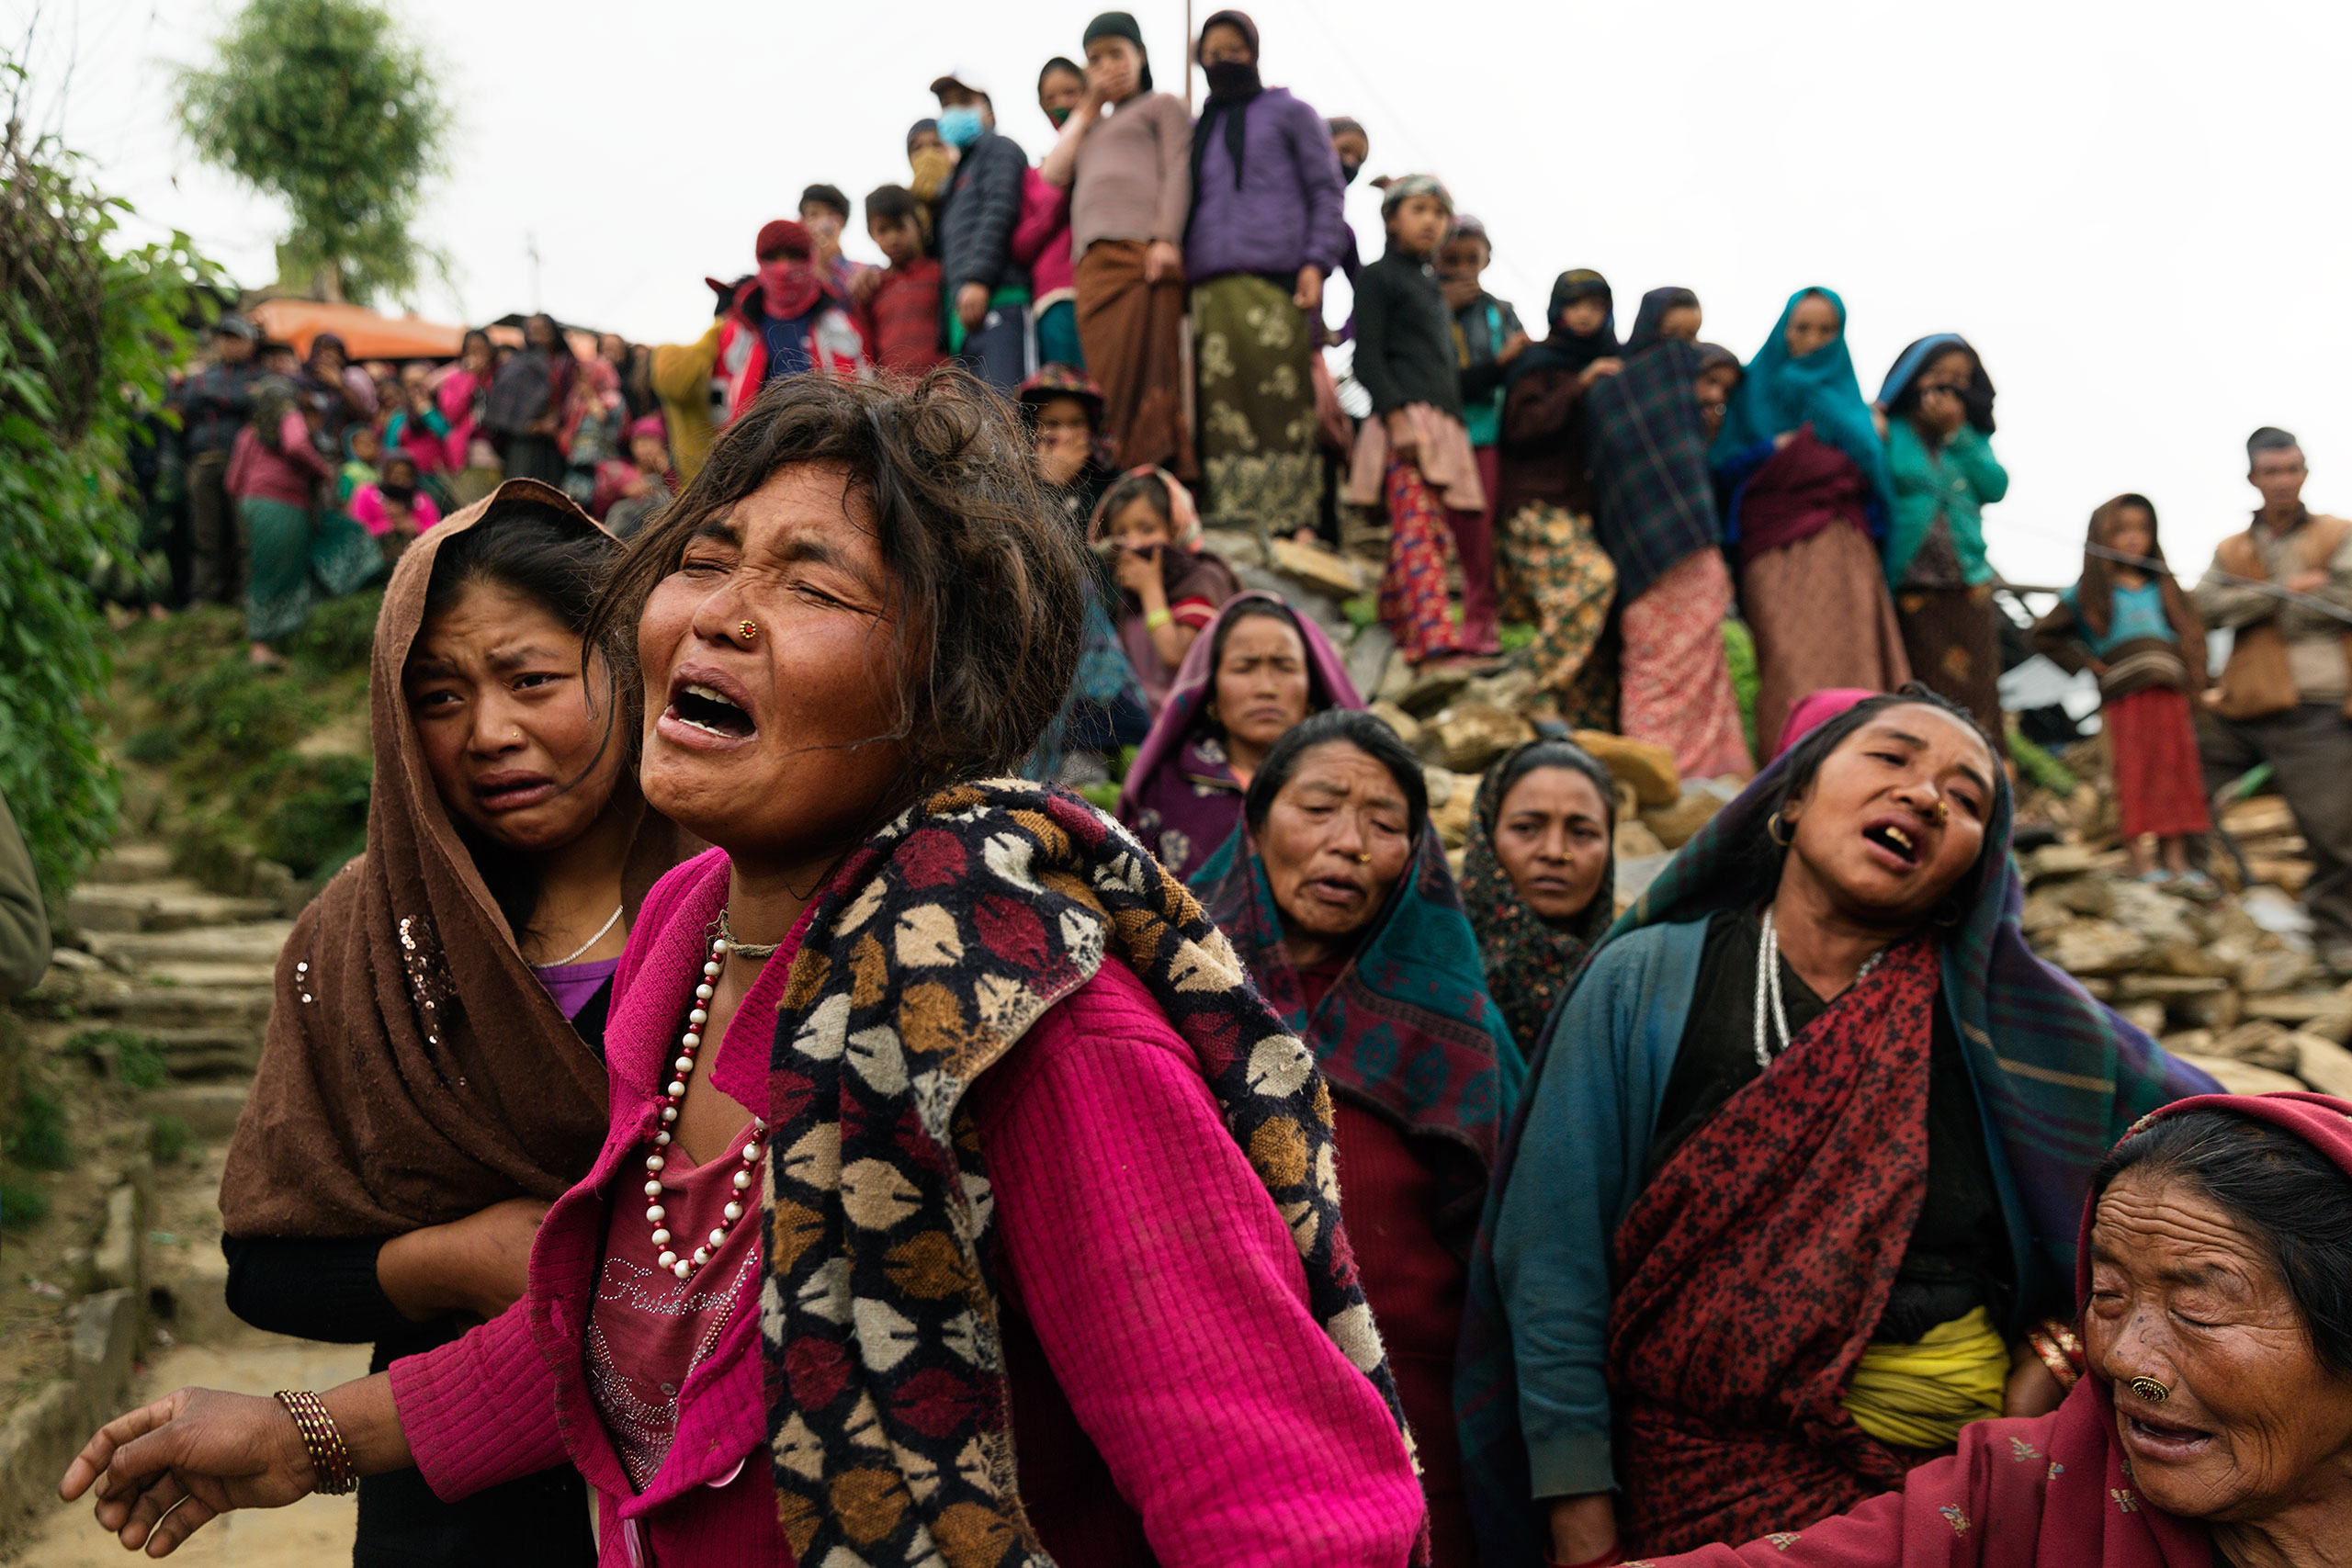 Bishnu Gurung sobs after her 3-year-old daughter, Rejina Gurung, was found buried in the rubble in  the village of Gumda in Gorkha district, near the epicenter of last month's Nepal earthquake, on May 8, 2015. The baby’s father is a guest worker in Malaysia.